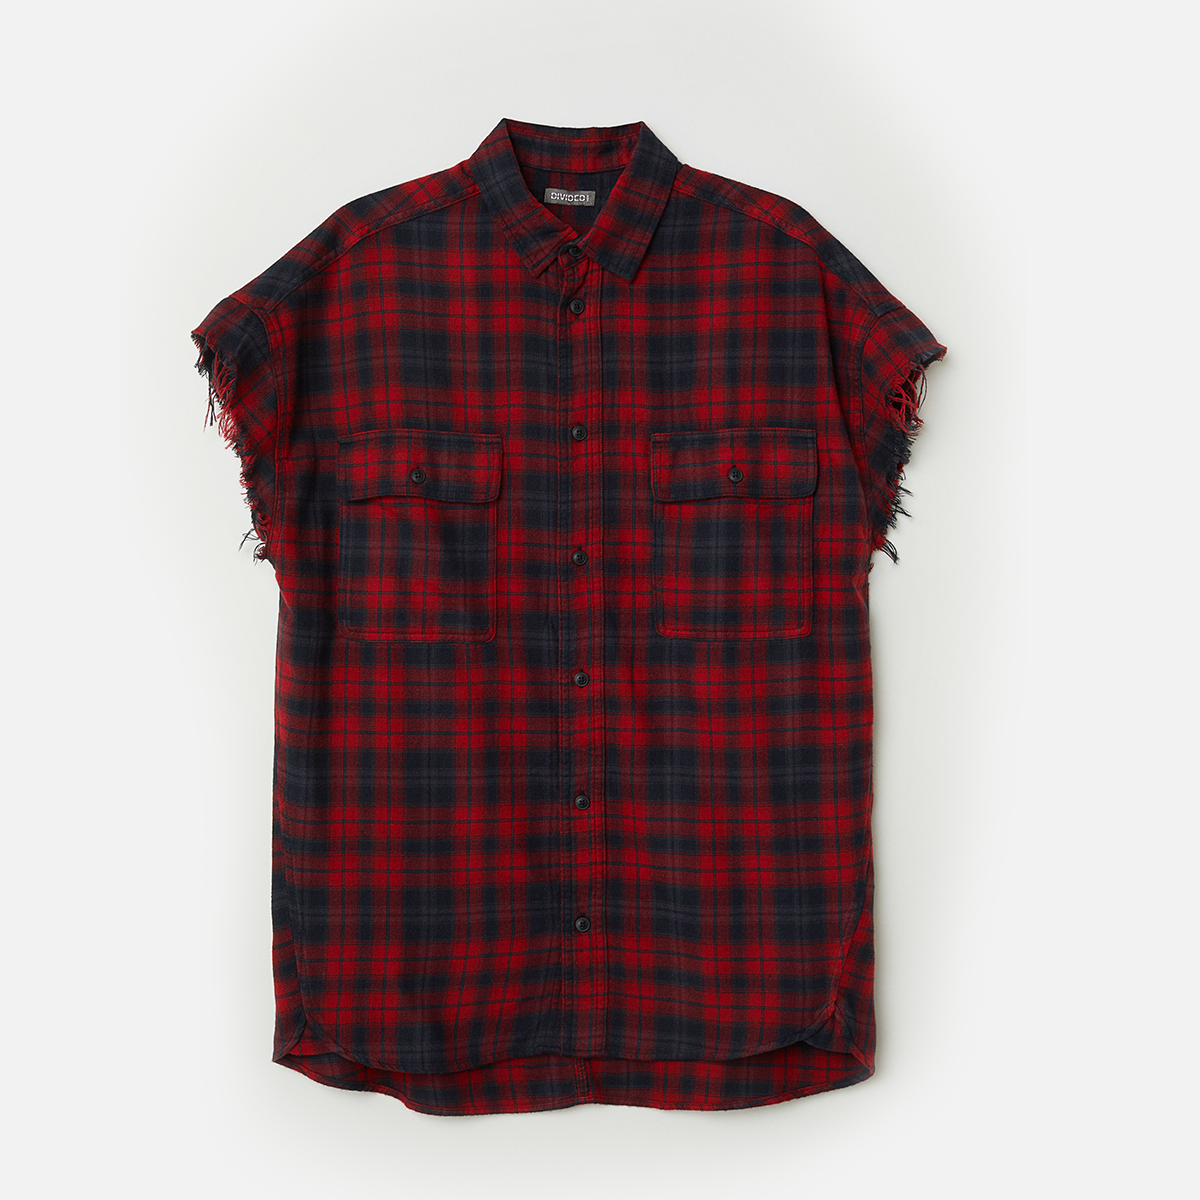 Nop Avenue Theme. Red Checked Shirt